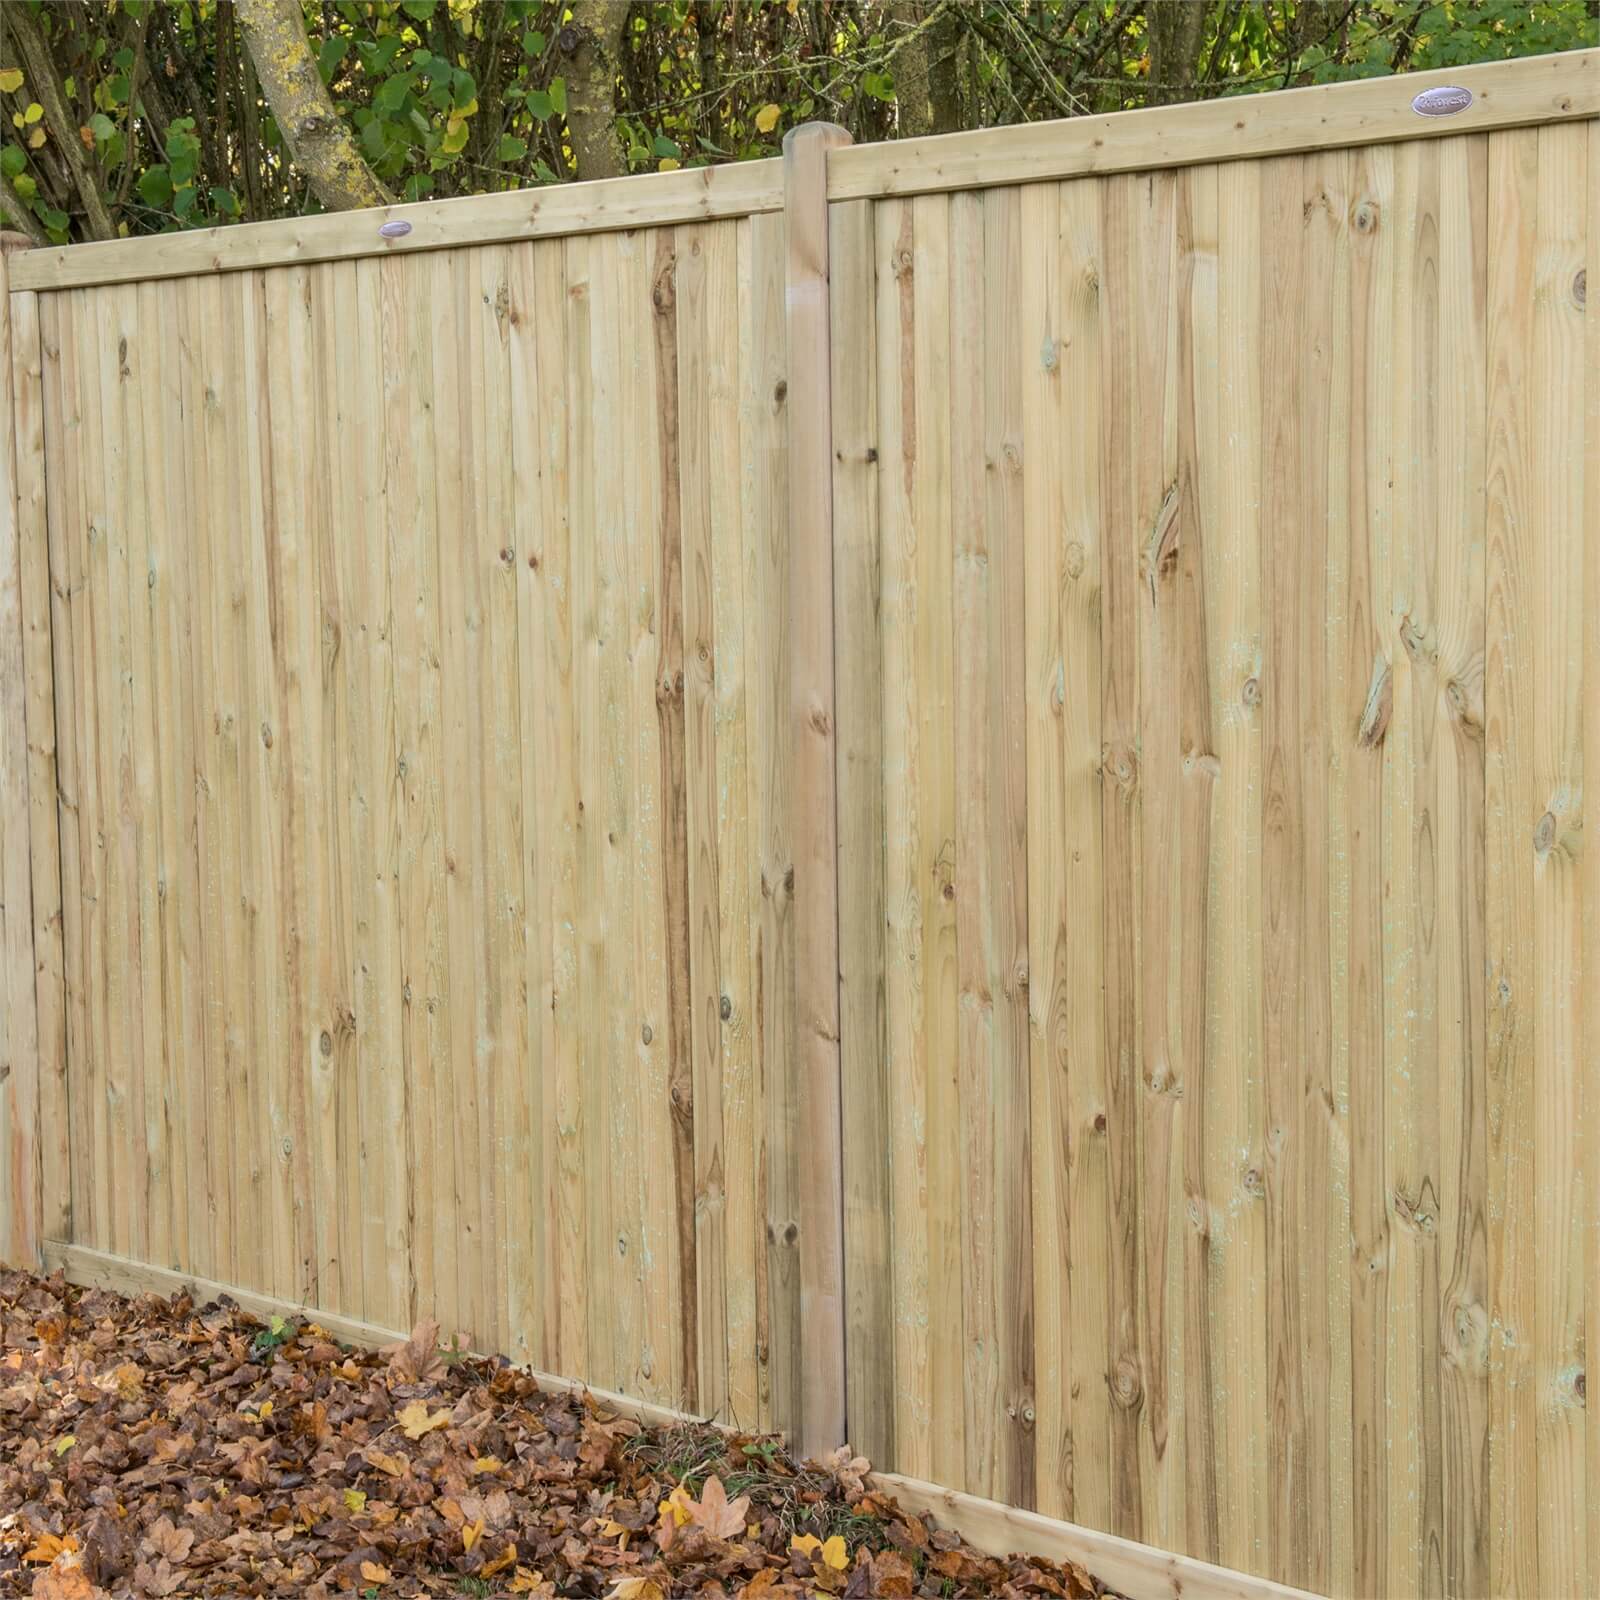 Forest Noise Reduction Fence Panel - 6ft - Pack of 4